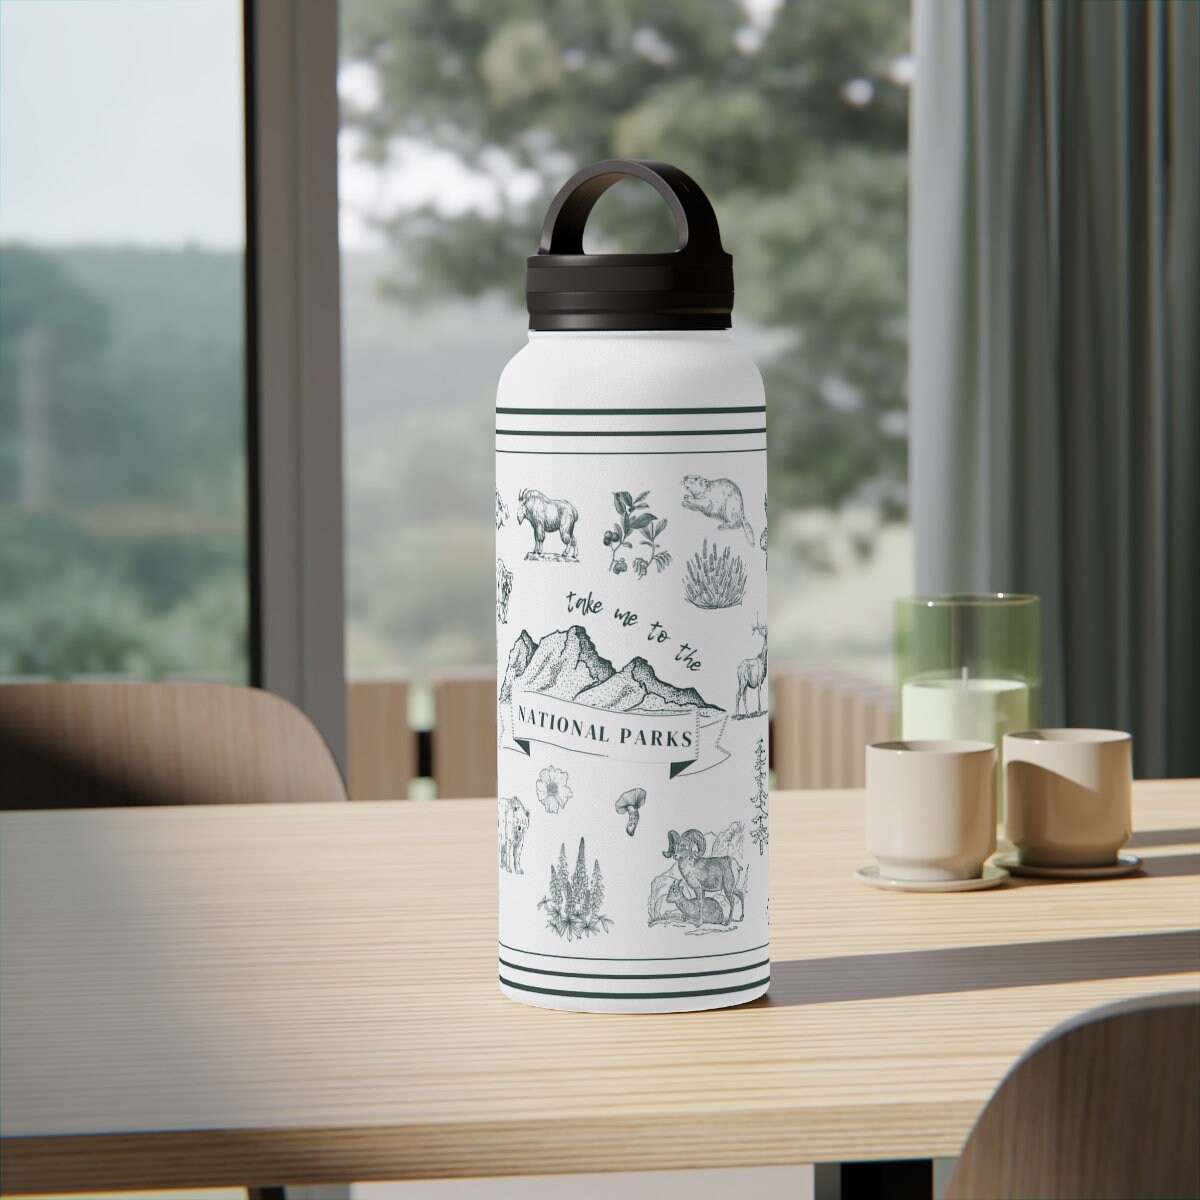 National Parks Insulated Water Bottle 32ozCelebrate your favorite national treasure everyday with this 32 oz insulated water bottle.
Perfect for road trips, camping, backpacking, and everyday use!
Capacity: 